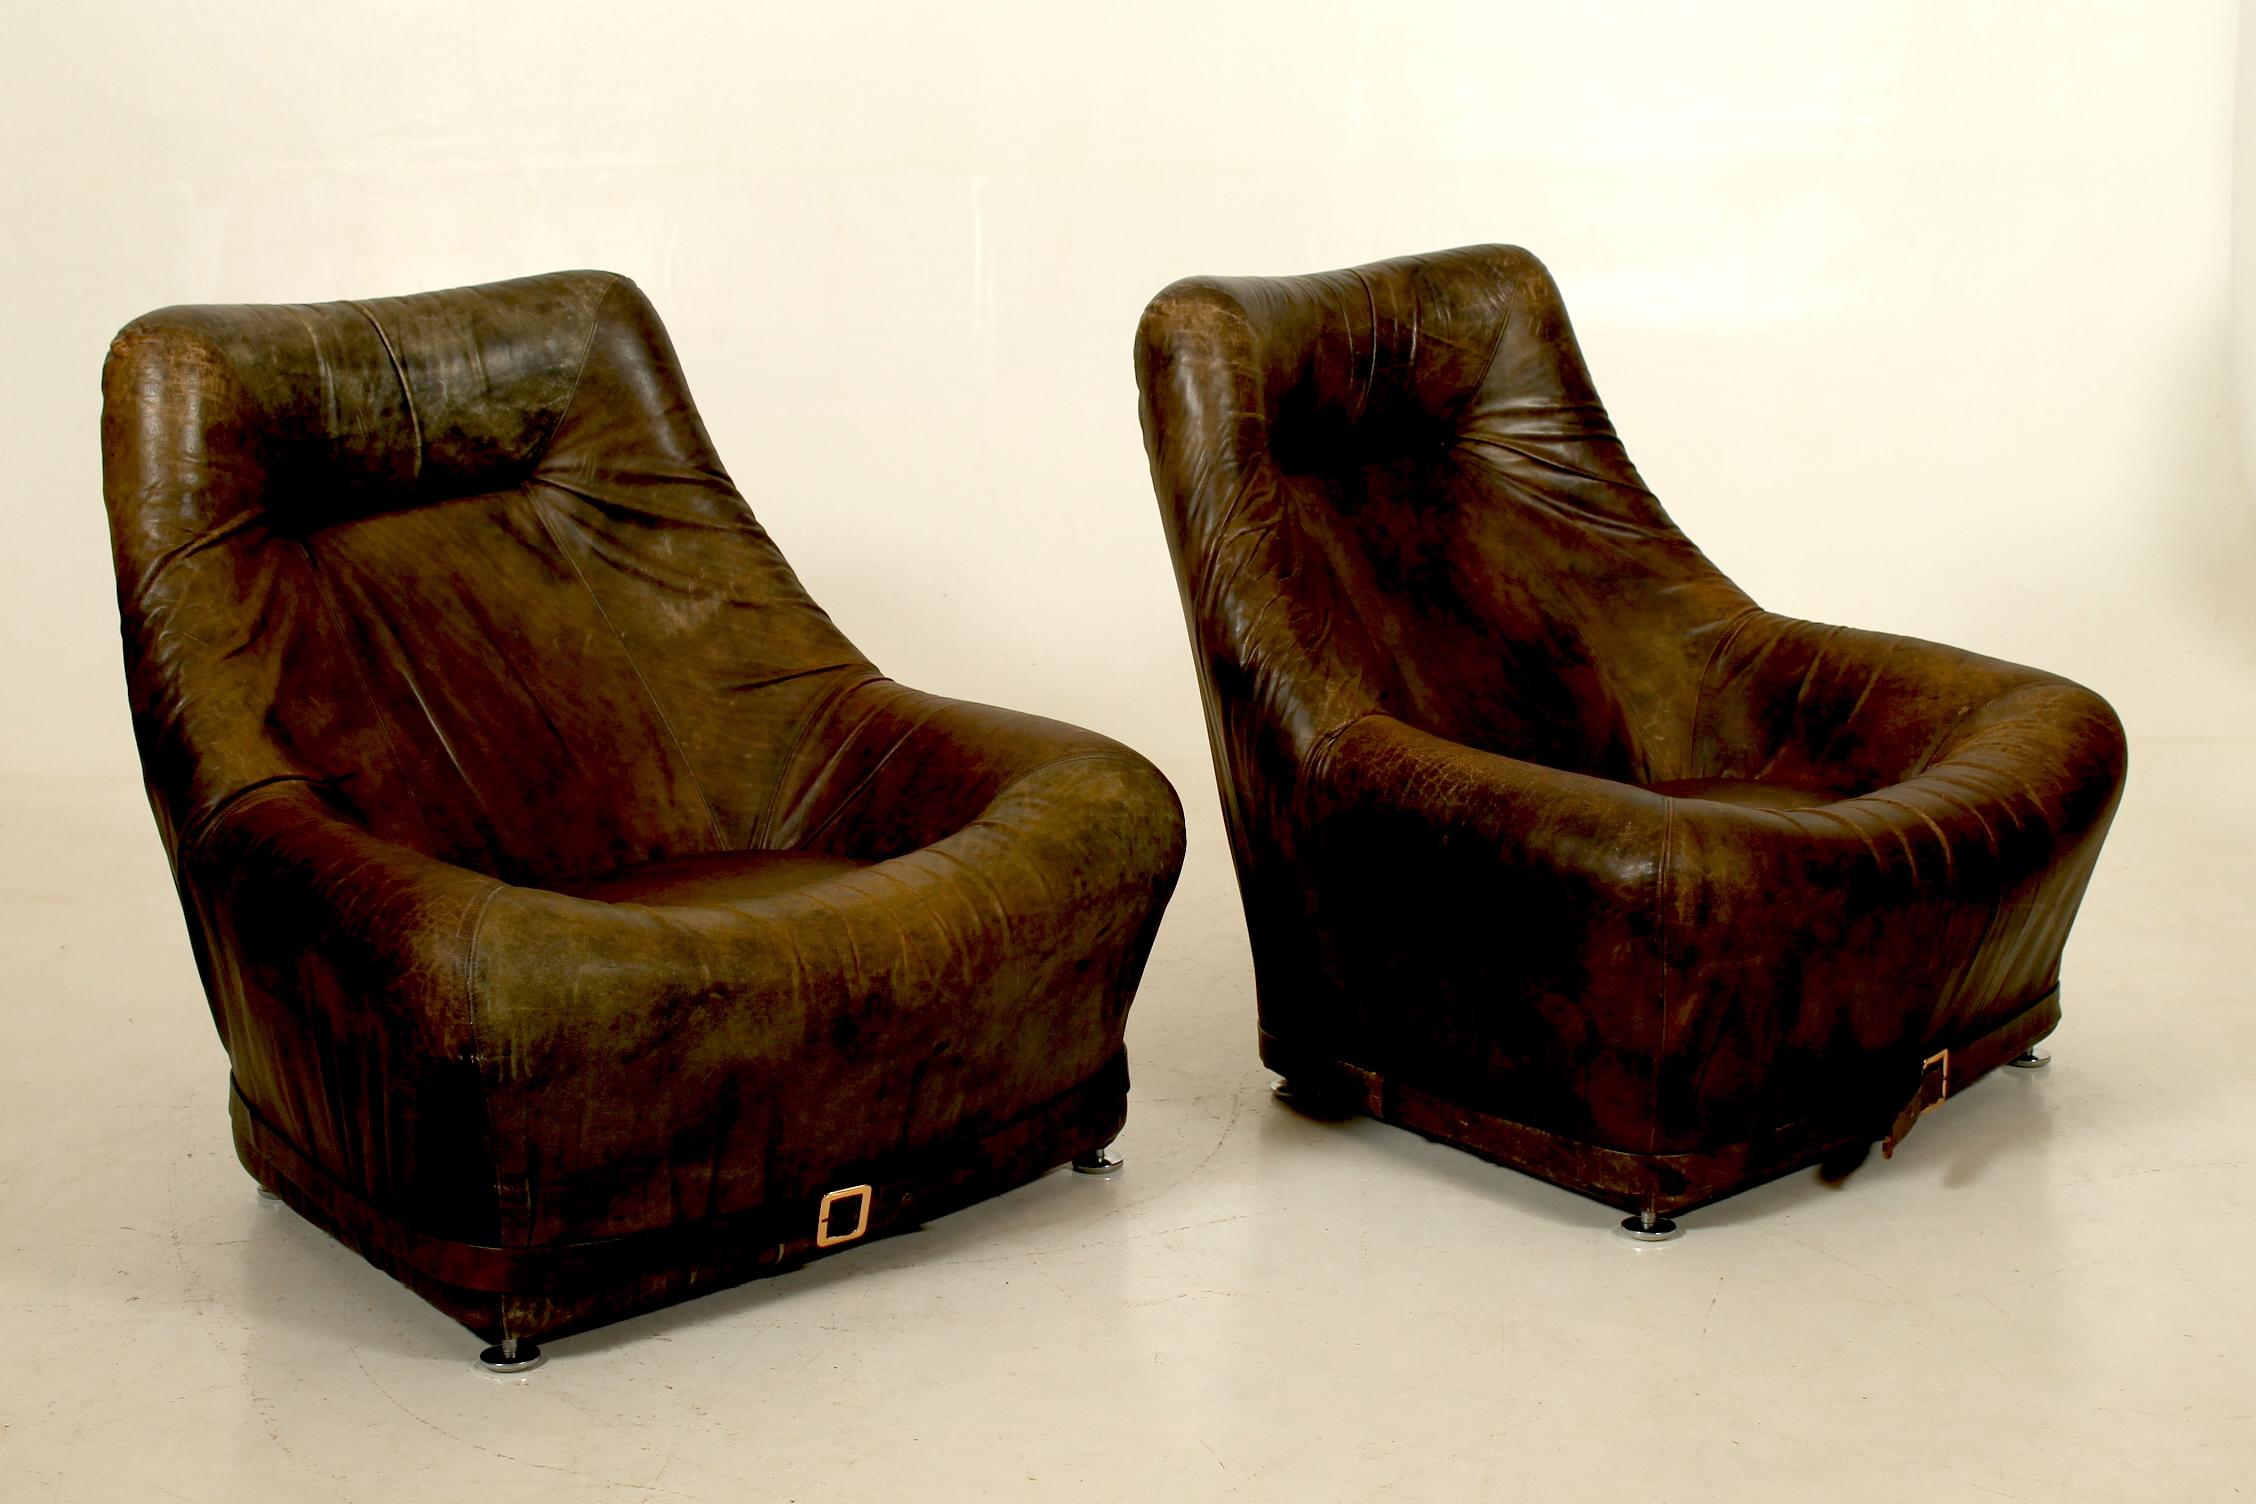 Pair of leather easy chairs with belt buckles. Attributed De Sede, Switzerland in the 1970s. Seat height 36 cm.
